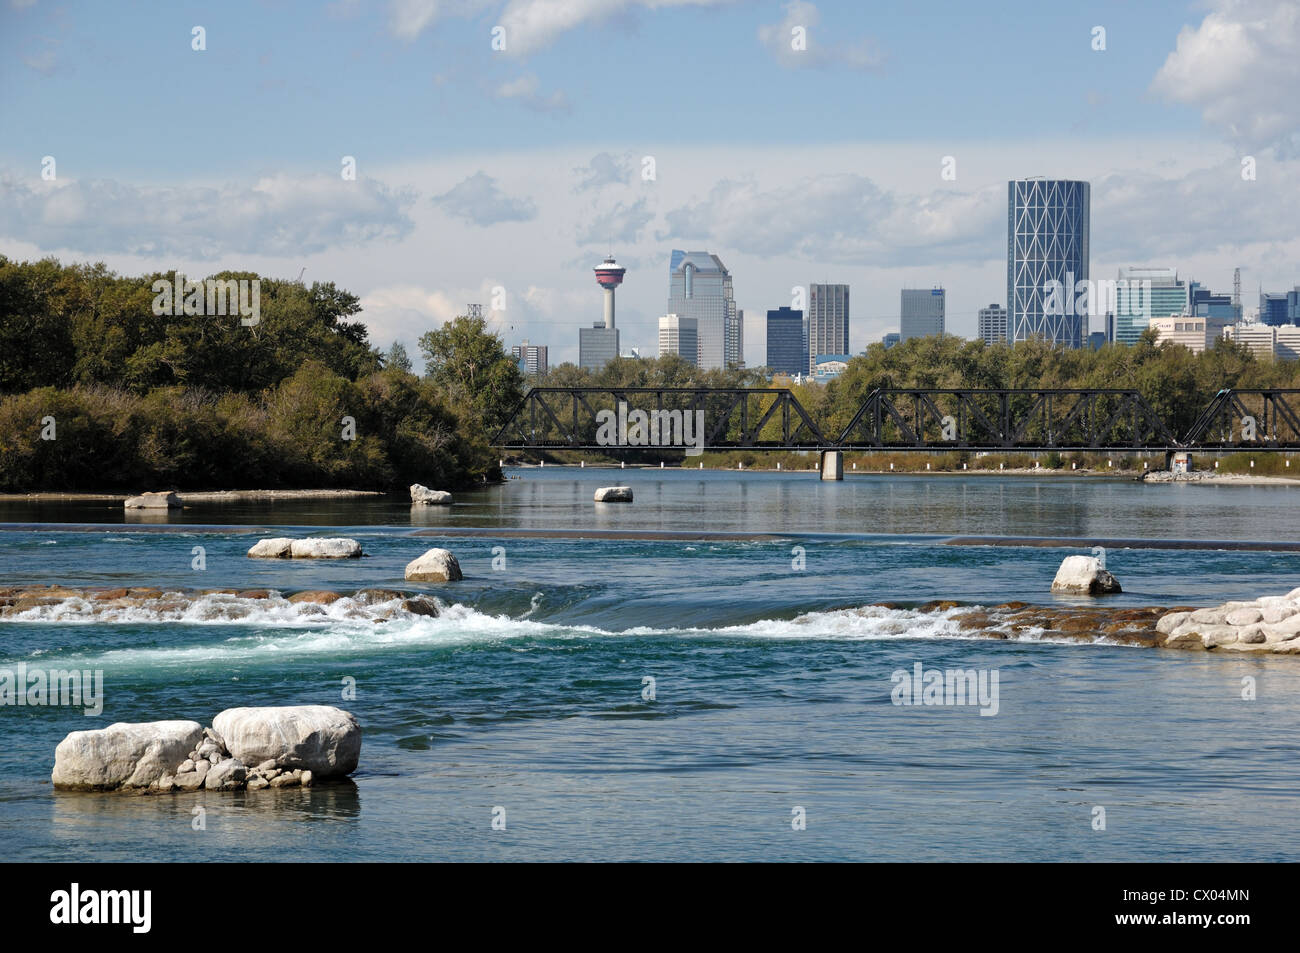 A view from the Bow River of the downtown core of Calgary Alberta, Canada. Stock Photo